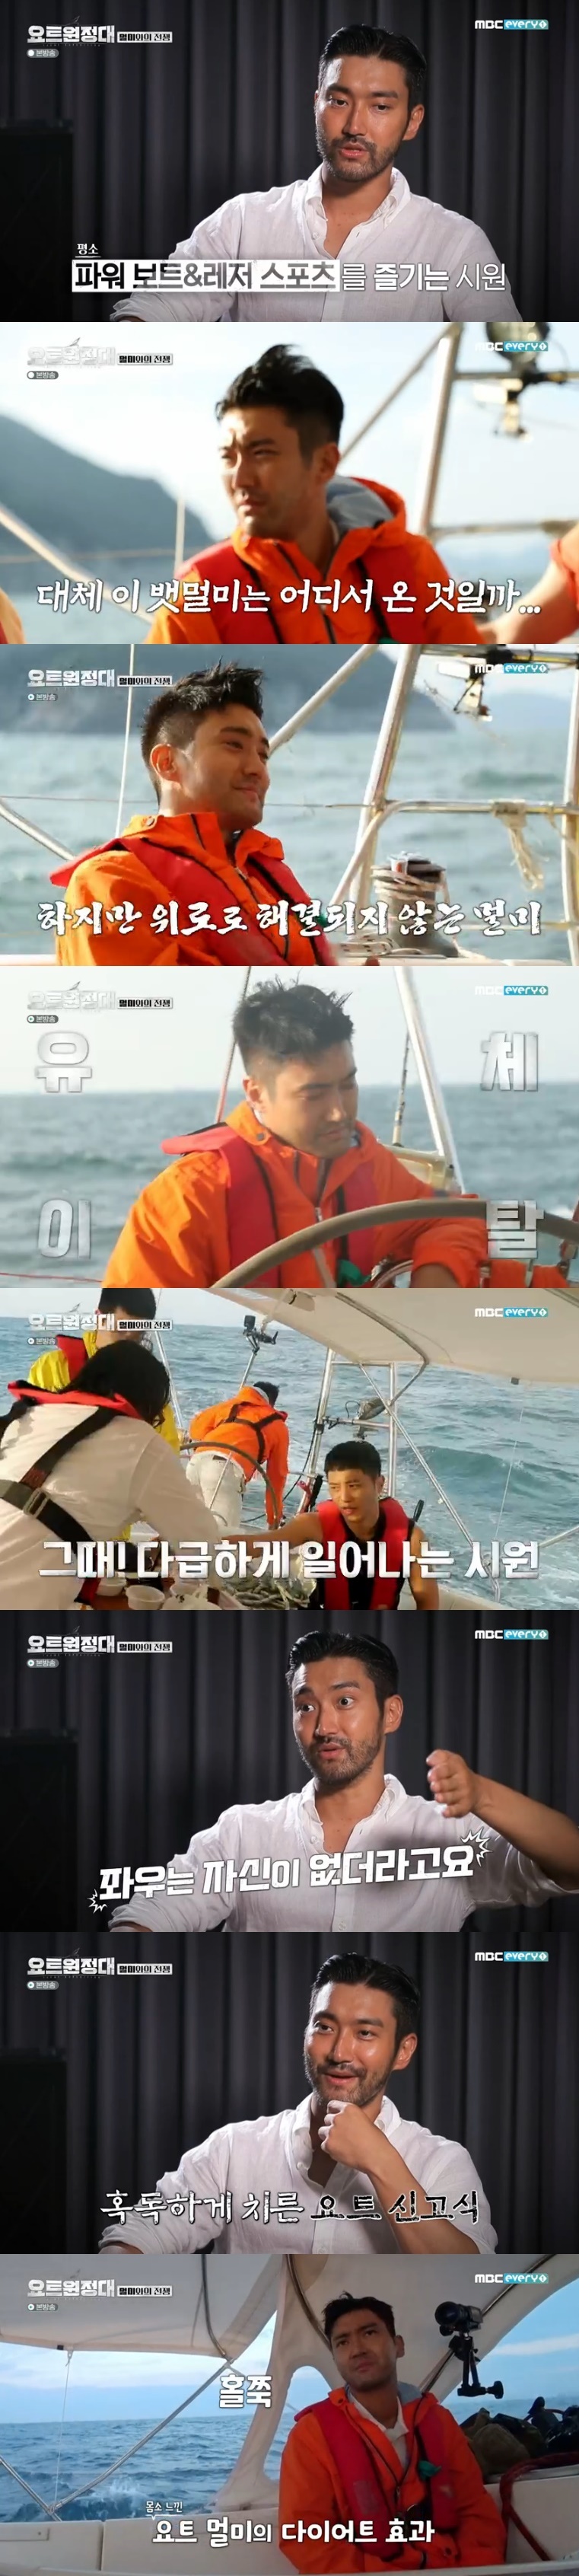 Seoul = = yacht Expedition Choi Siwon suffered from seasickness.In MBC Everlon entertainment program yacht Expedition broadcast on the 24th, Choi Siwon and other members finally made the Embarkation for Cythera toward Pacific Ocean.Among them, Choi Siwon complained of extreme motion sickness symptoms and caused sadness.I had no idea what was going to happen then, Choi Siwon said in an interview with the production team.In fact, shortly after The Embarkation for Cythera, Choi Siwons expression stiffened and caused curiosity.Choi Siwon said, I thought I had no seasickness, I thought I would not have real seasickness because I was a type who usually likes power boats and leisure sports.Choi Siwon had previously shown his most exciting appearance in his first meeting with Crewe, saying he was a big hit on yacht.Crewes such as Jin Goo, Chang Kiha, and Song Ho-joon, who knew the tendency of Choi Siwon, were more worried about Is it okay?They offered consolation, but Choi Siwons motion sickness showed no signs of improvement.The front and back movement is fine, but Im not confident that its shaking from side to side, Choi Siwon explained, while vomiting several times on the yacht.He was worried about the captain Kim Seung-jin, who was in a harsh ceremony, saying in an interview, You just have to take the sickness naturally, its okay to adjust.There is no medicine in motion sickness, he said.I think its been an old man since Ive already drifted, joked the crew, who were worried about Choi Siwon.I think this will lose a lot of weight if I ride this long, said Choi Siwon, who became a fuss in two hours of The Embarkation for Cythera.It is noteworthy what adaptation Choi Siwon will show as a member in the future.Meanwhile, yacht expedition is a documentary entertainment program featuring the process of challenging the Pacific Ocean voyage by four men who dreamed of adventure on the yacht. Jin Goo, Choi Siwon, Chang Kiha, Song Ho Jun and Kim Seung-jin appear.